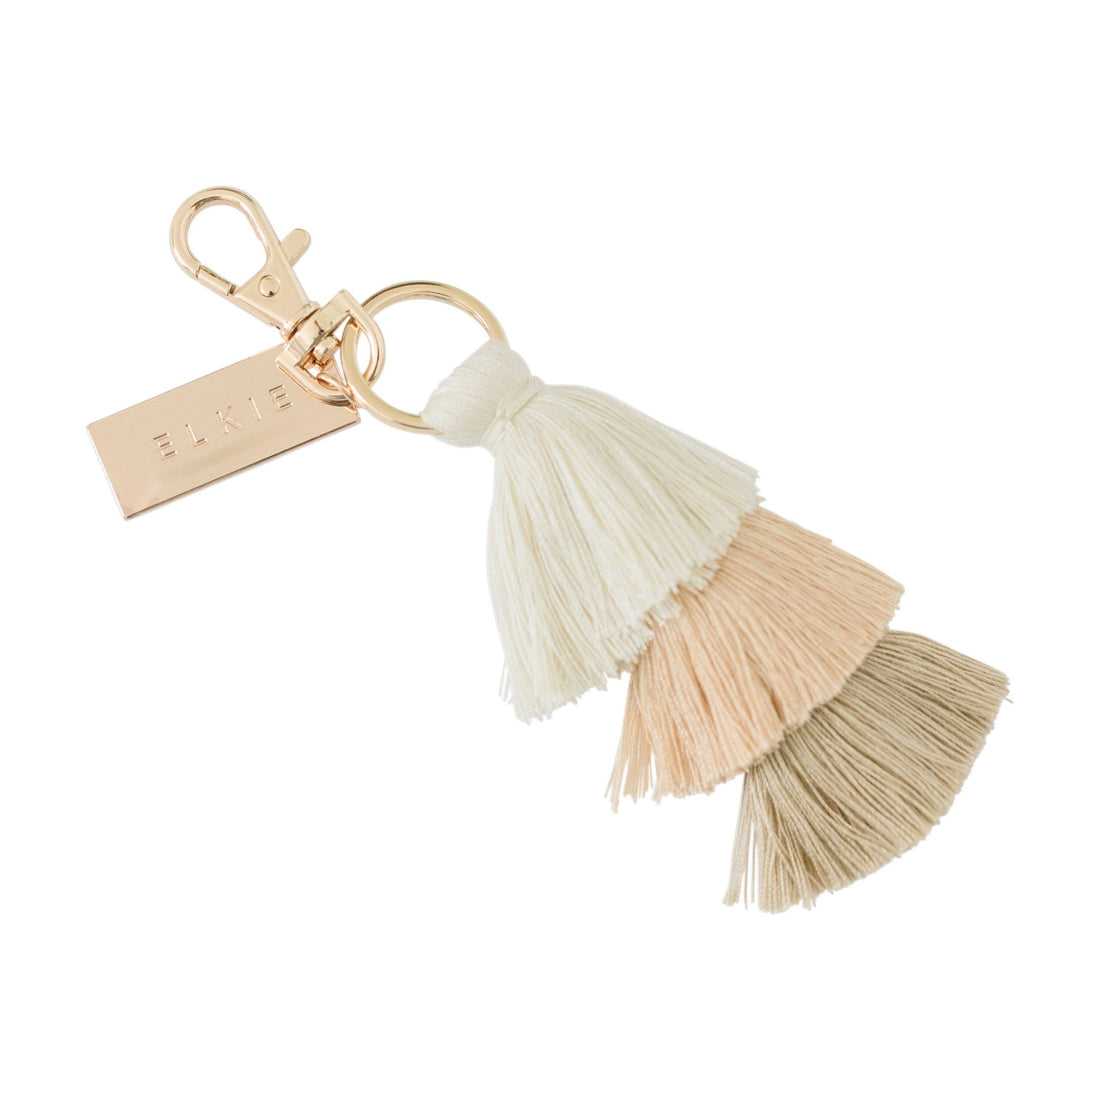 elkie sand tassl bag charm. colors are cream, beige, and tan